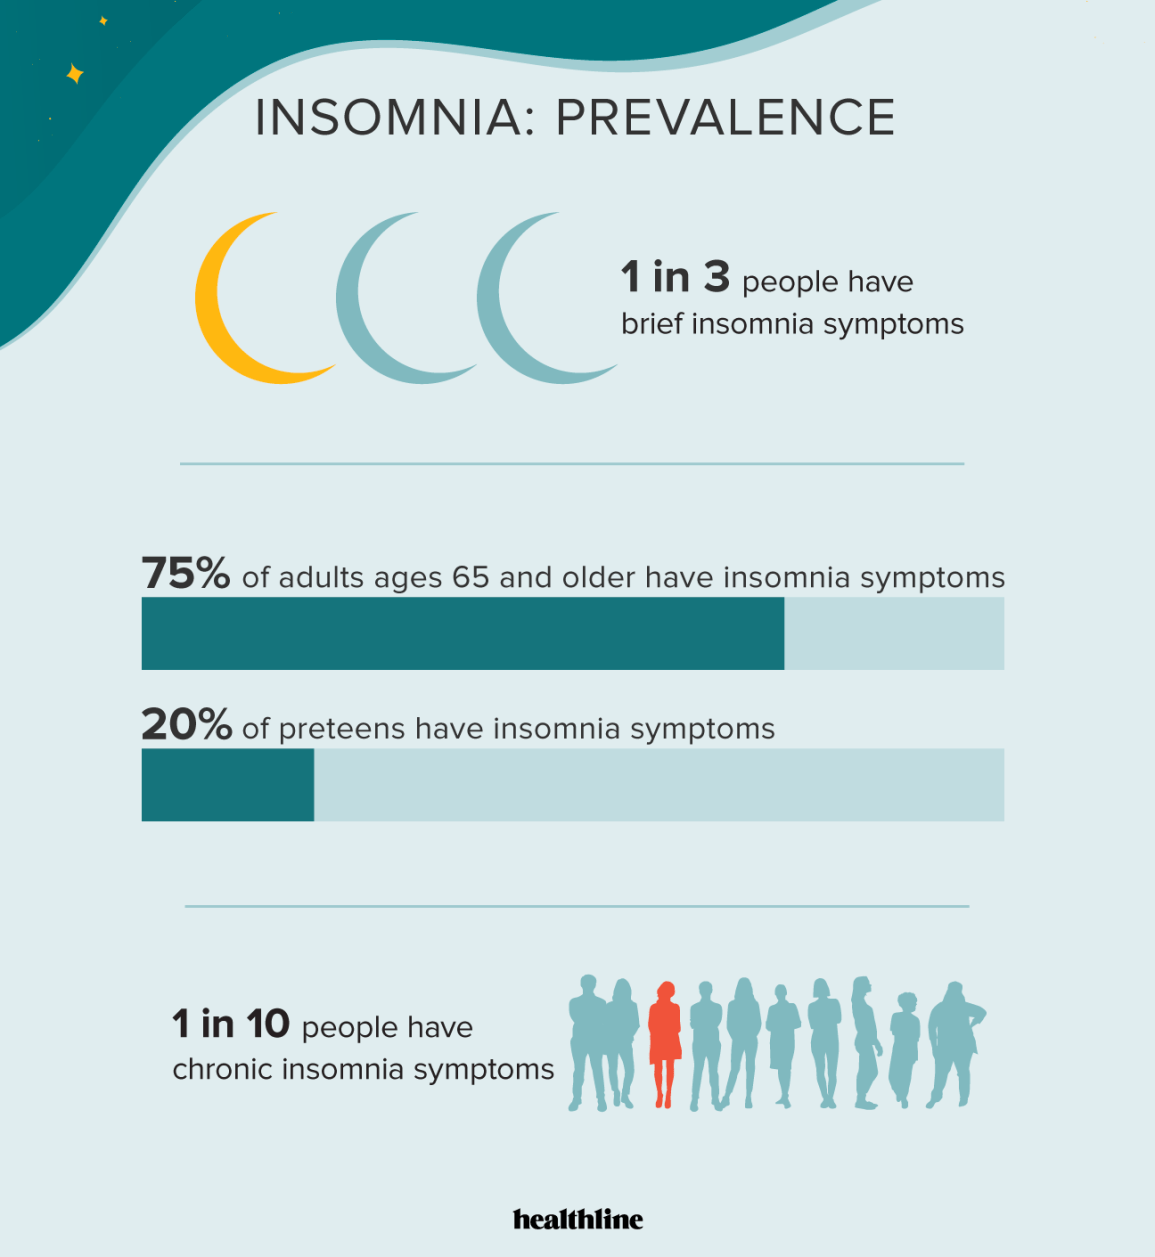 How prevalent is insomnia?